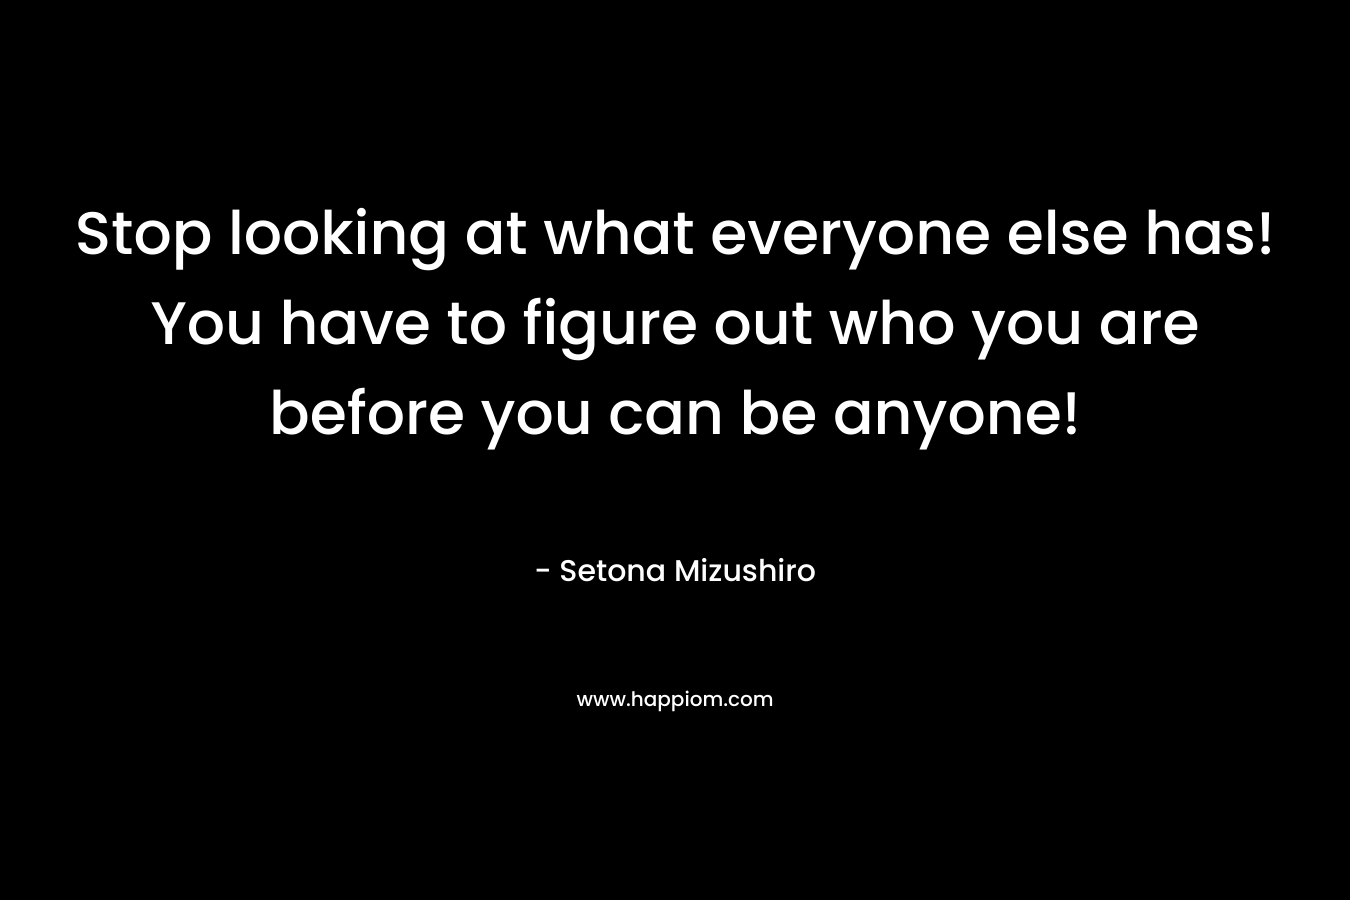 Stop looking at what everyone else has! You have to figure out who you are before you can be anyone! – Setona Mizushiro